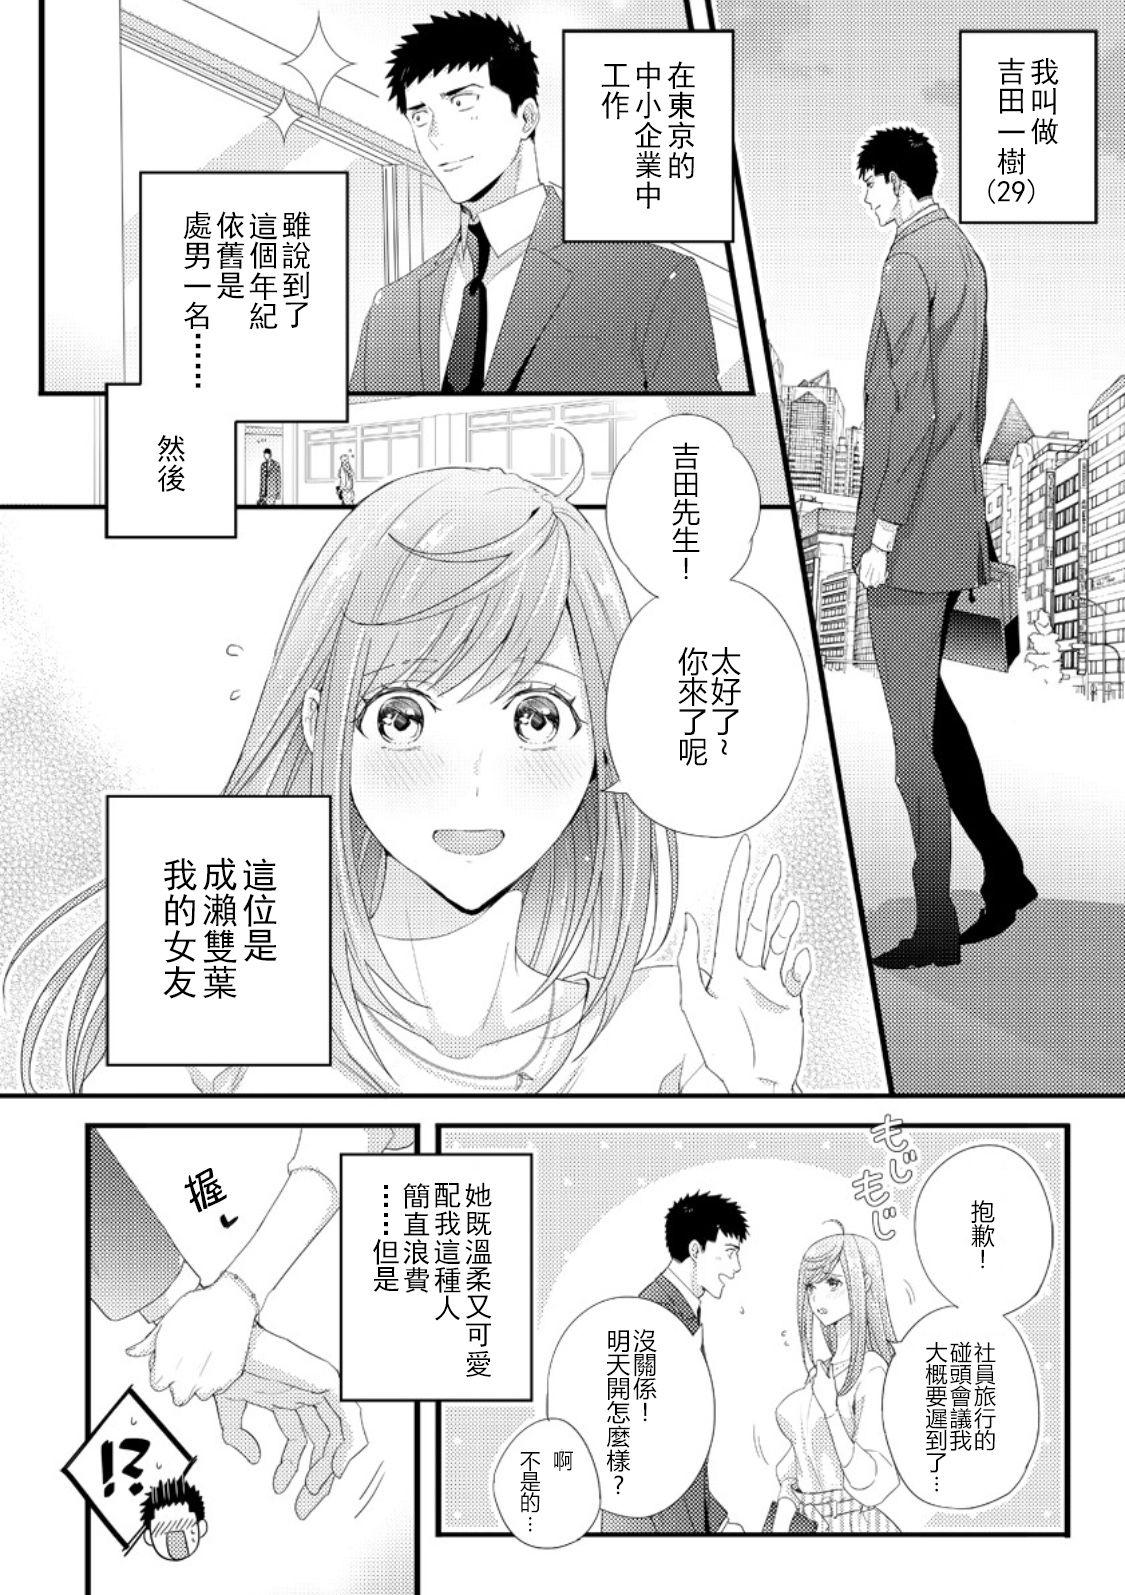 Please Let Me Hold You Futaba-San! Ch.1 1